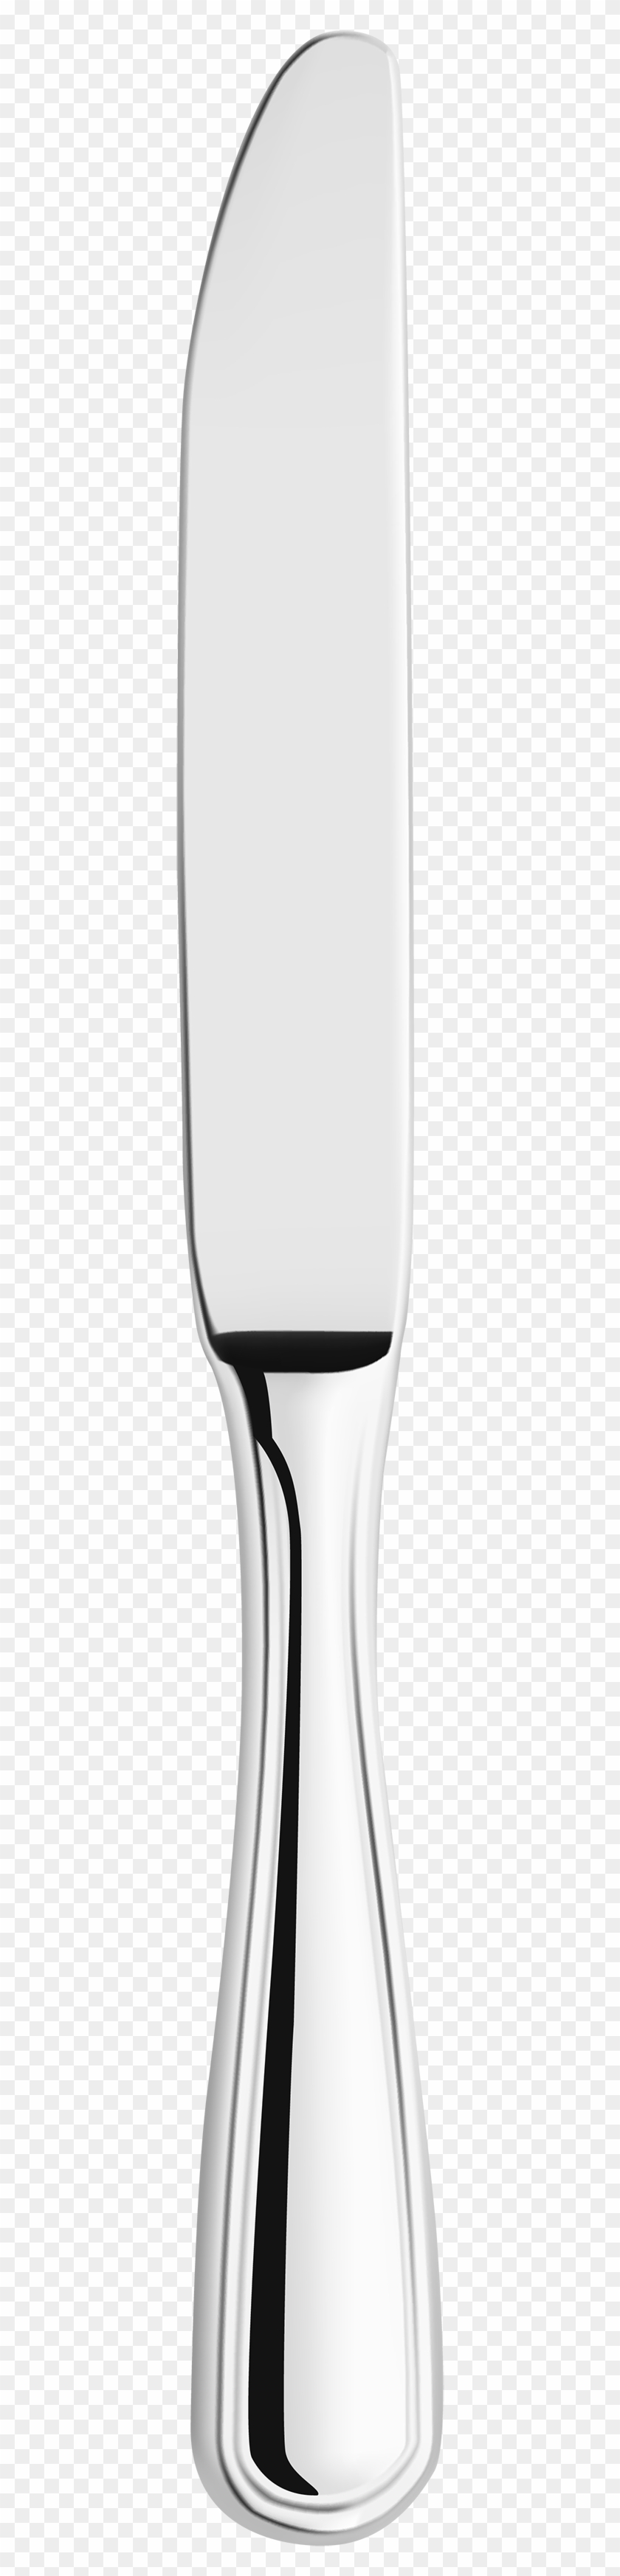 Table Knife Png Clipart - Monochrome #206378